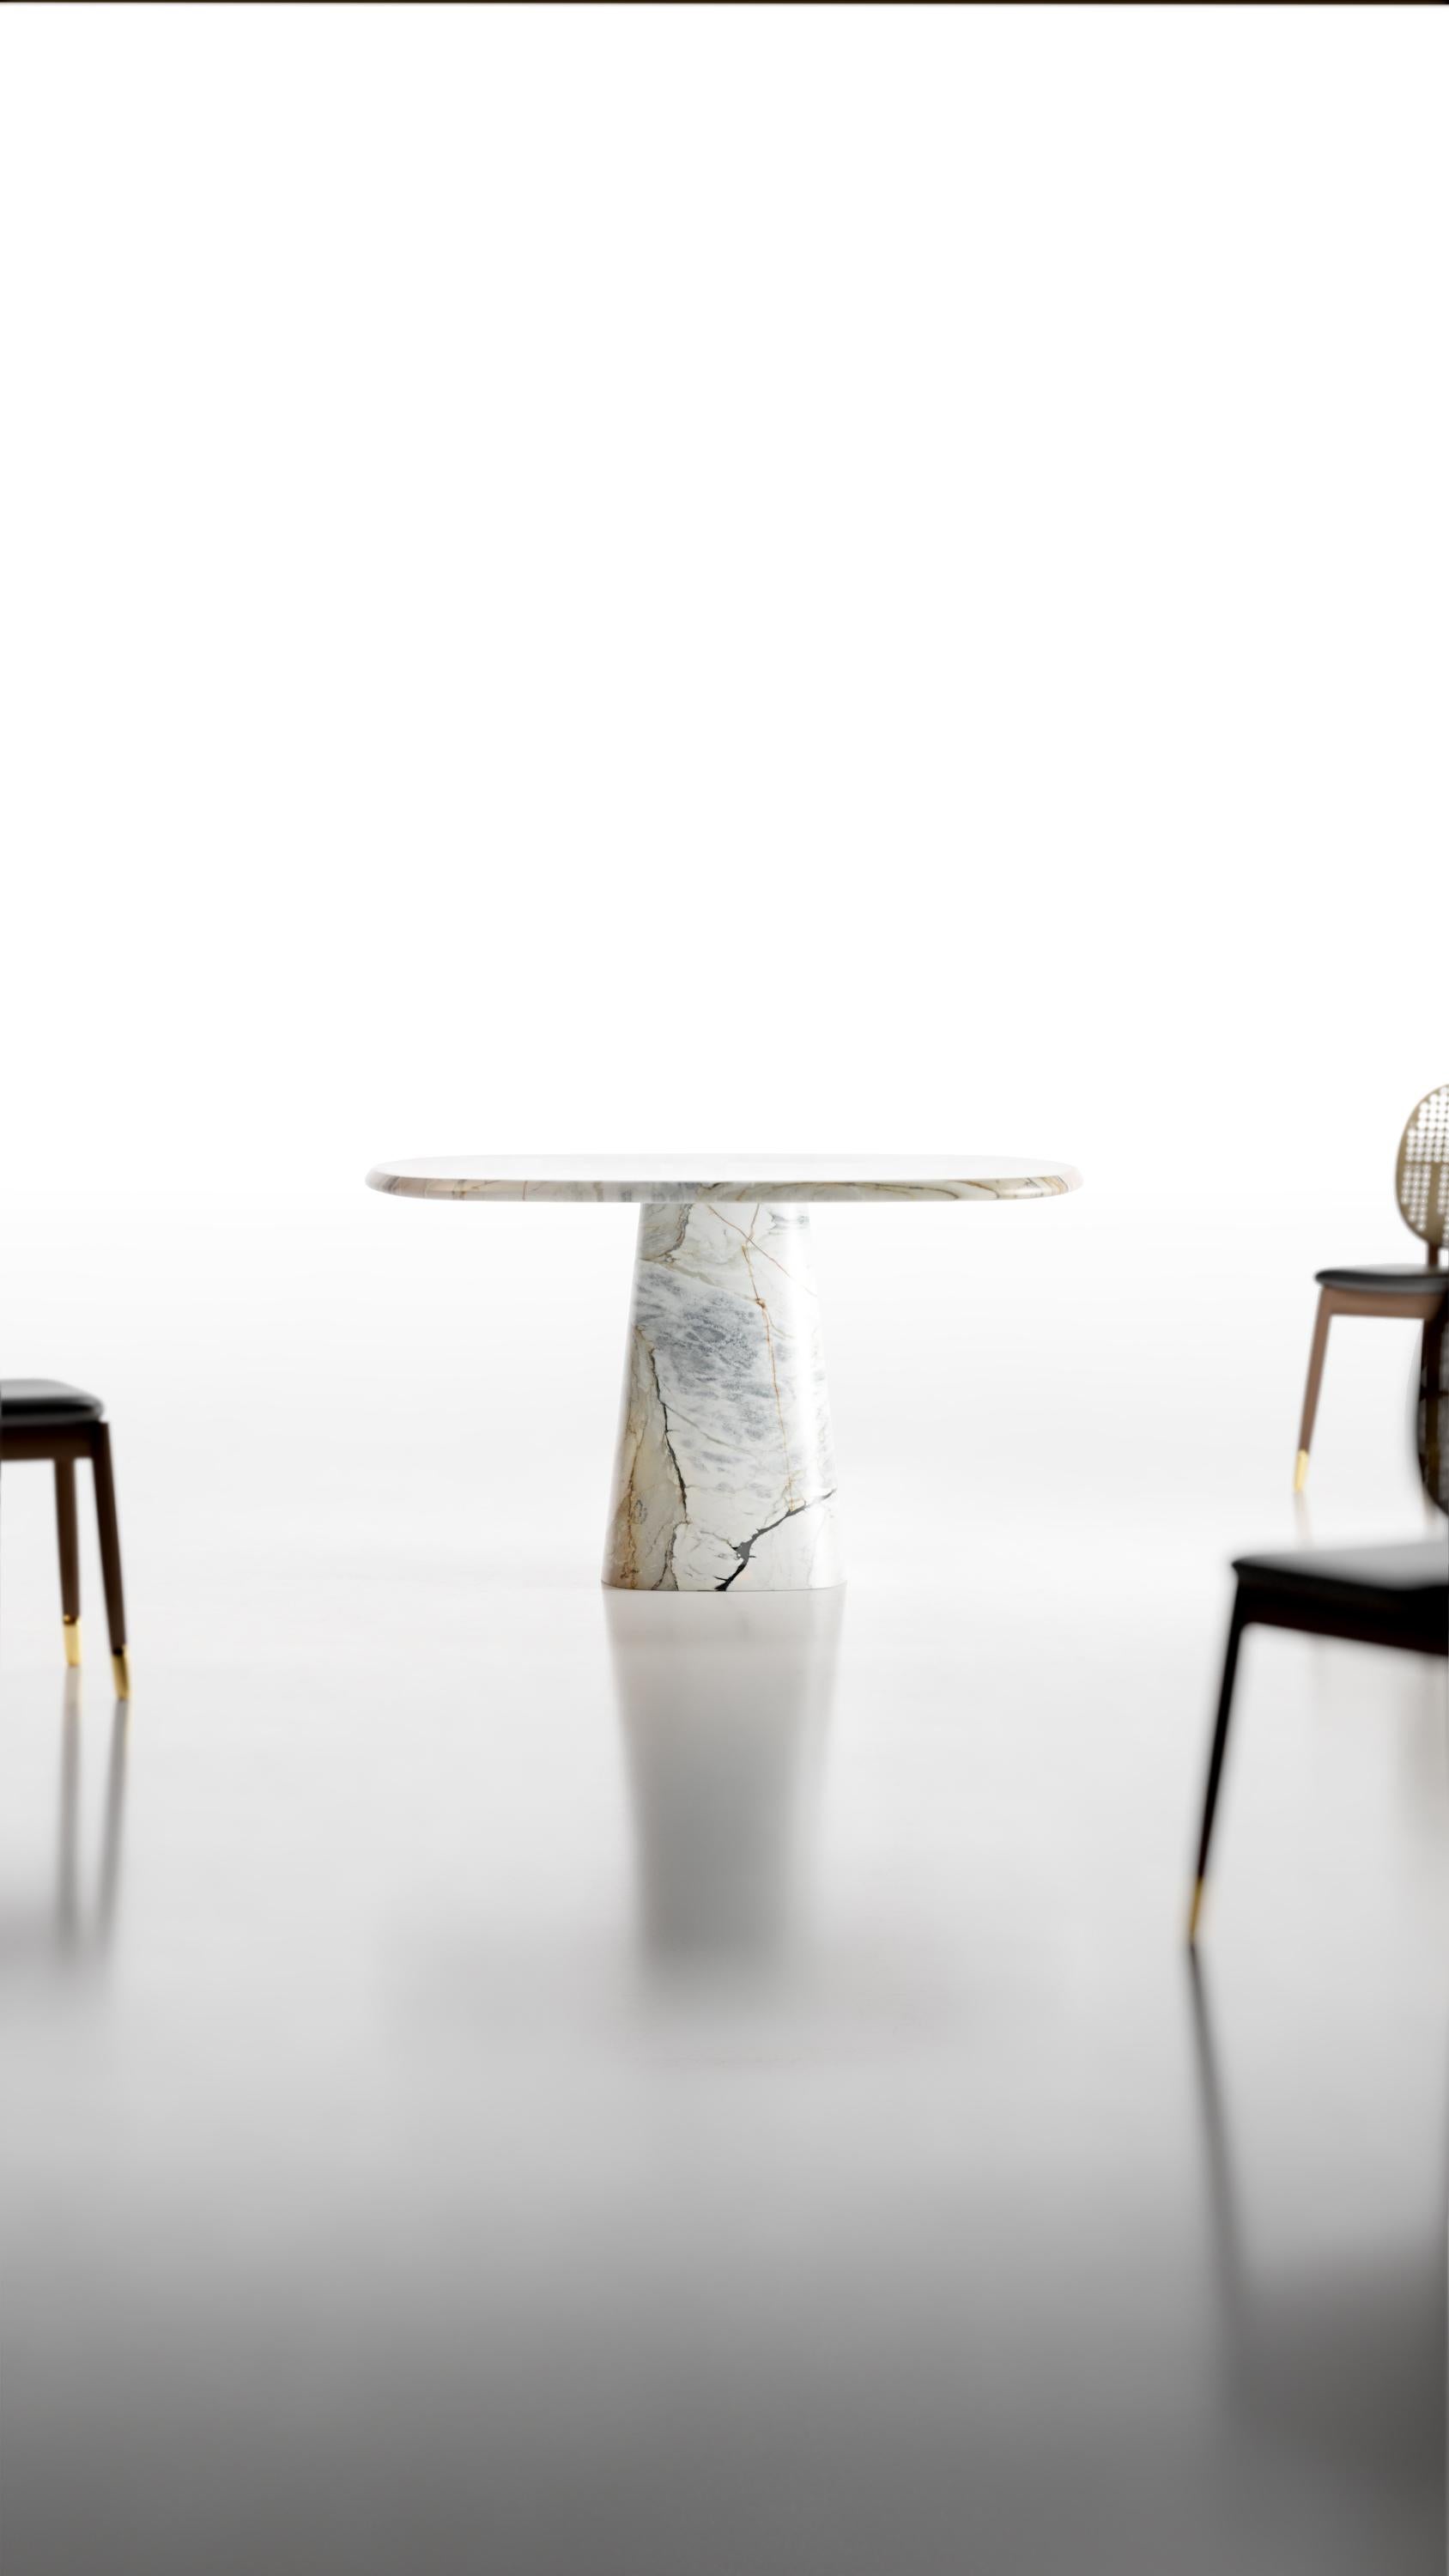 Calacatta Macchia Vecchia wedge table by Marmi Serafini
Materials: Calcatta Macchia Vecchia marble.
Dimensions: D 130 x H 75 cm
Other marbles available (prices may vary): Kilknos, Travertino Silver, Rosso Francia, Calacatta Macchia Vecchia.


Marmi